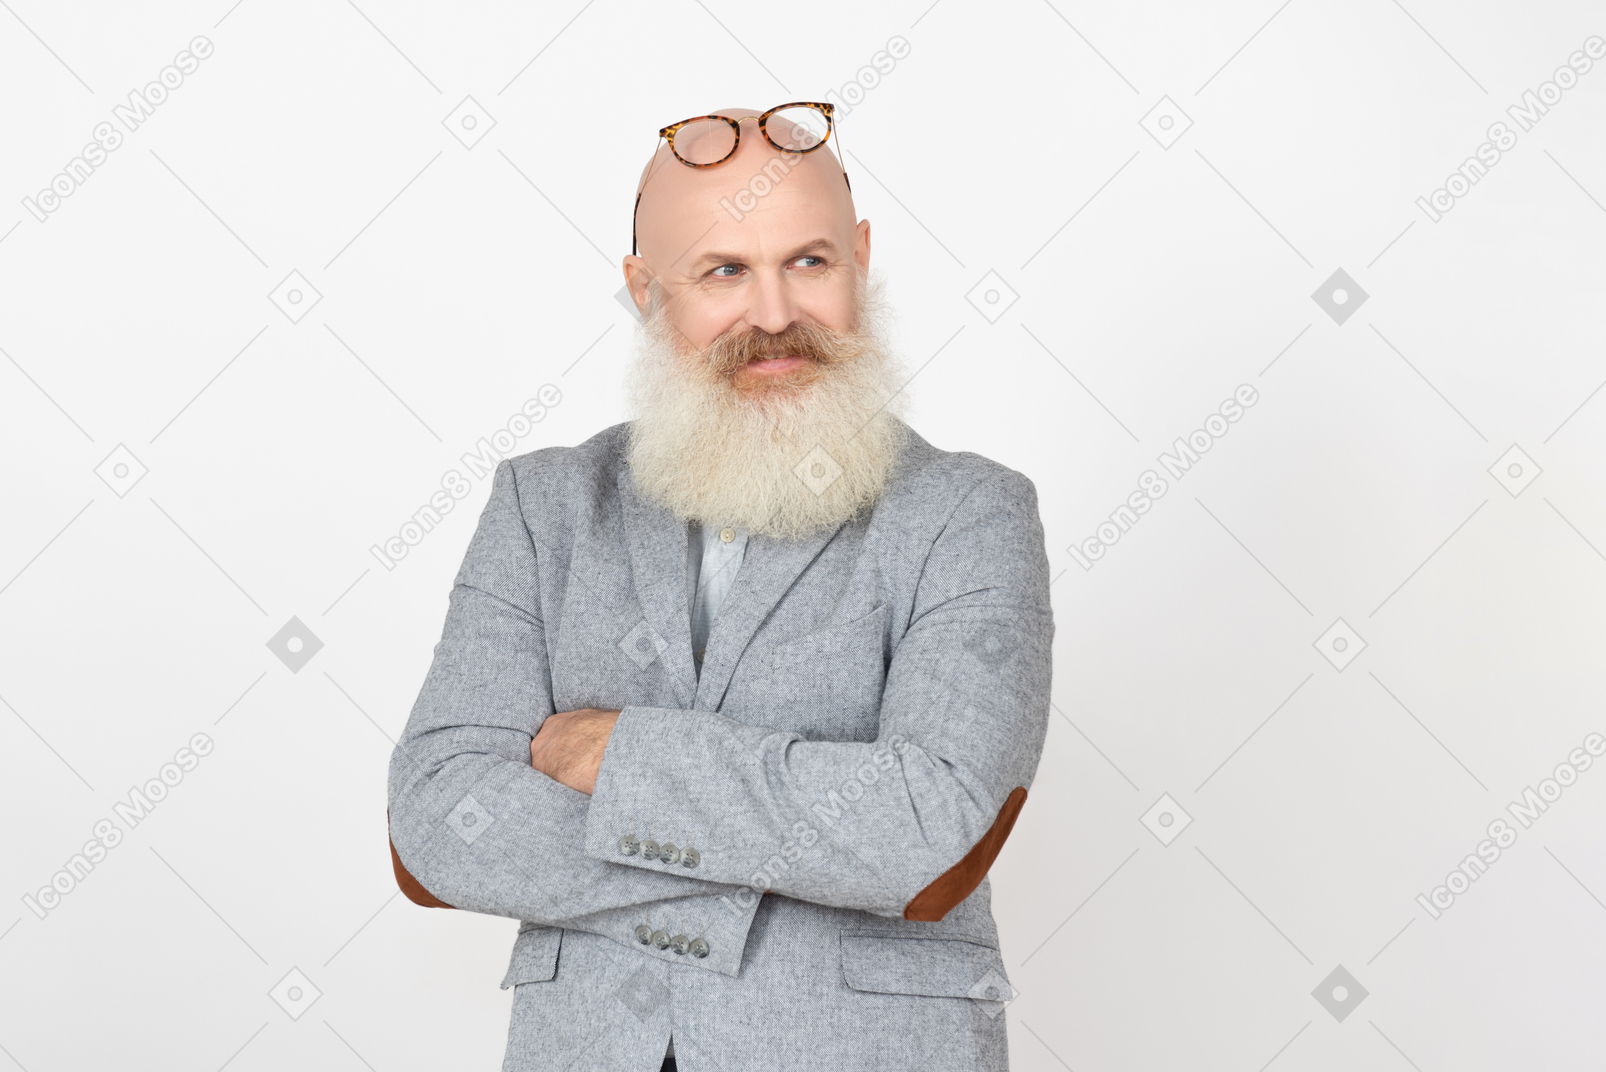 Distracted mature professor with his eyeglasses on head and hands folded